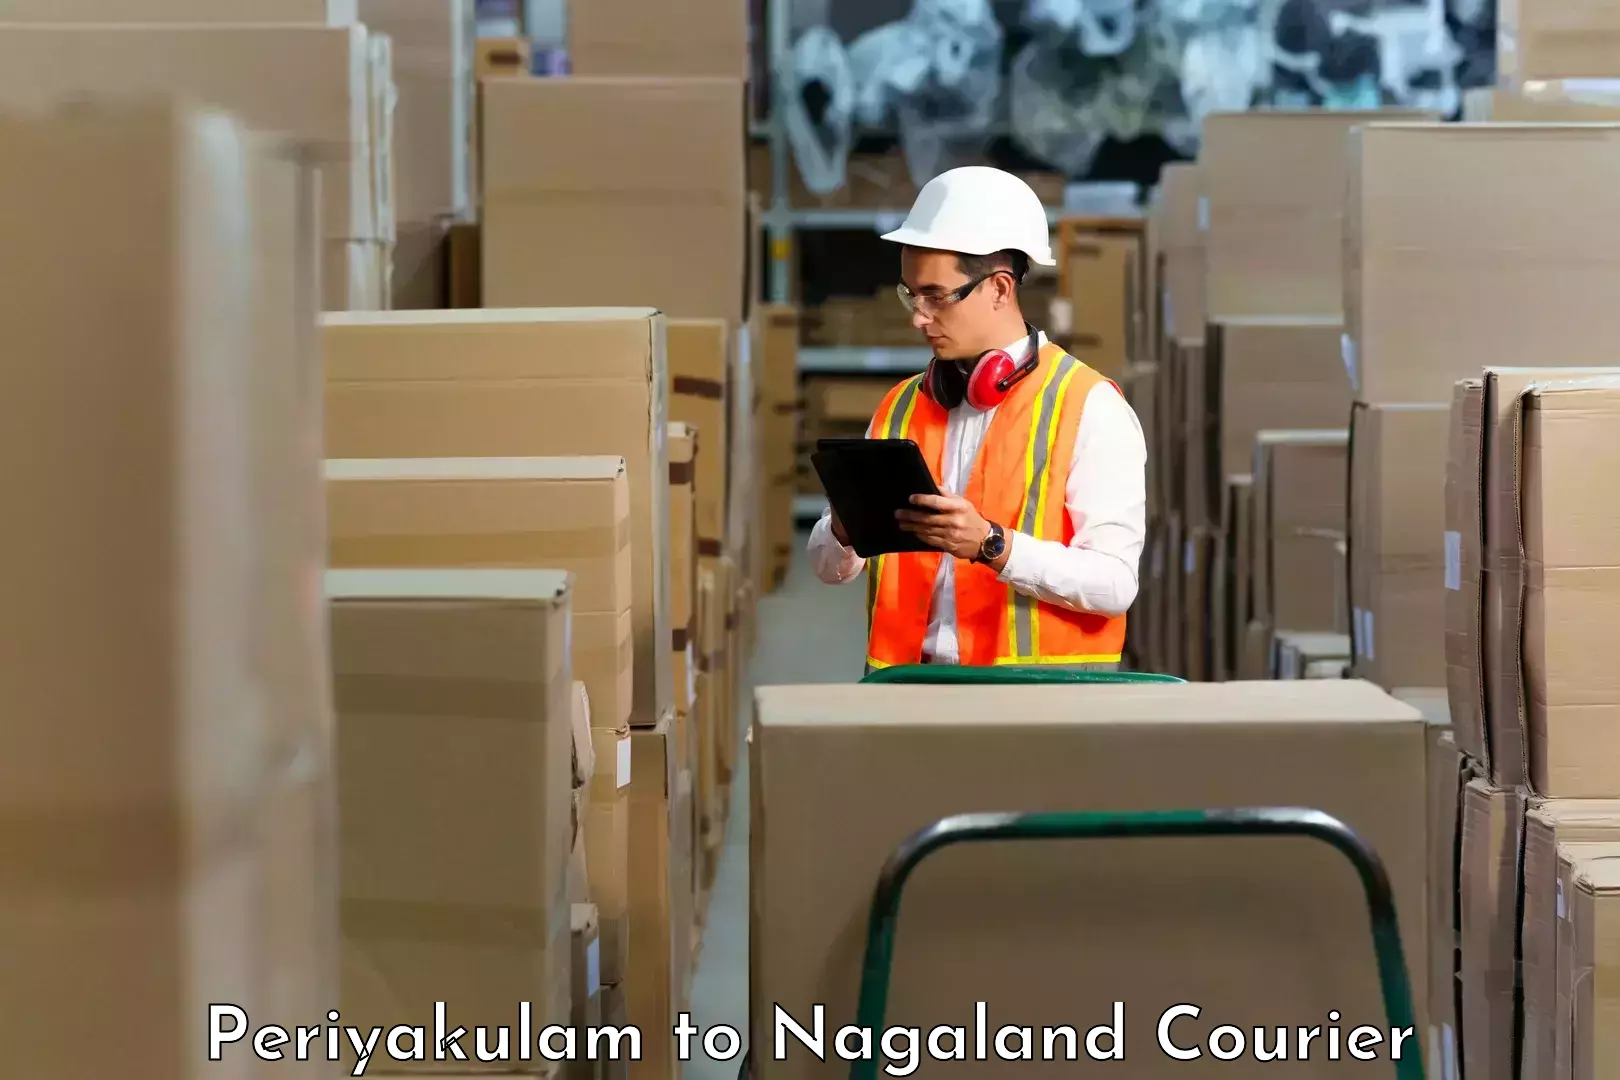 Small parcel delivery in Periyakulam to Nagaland